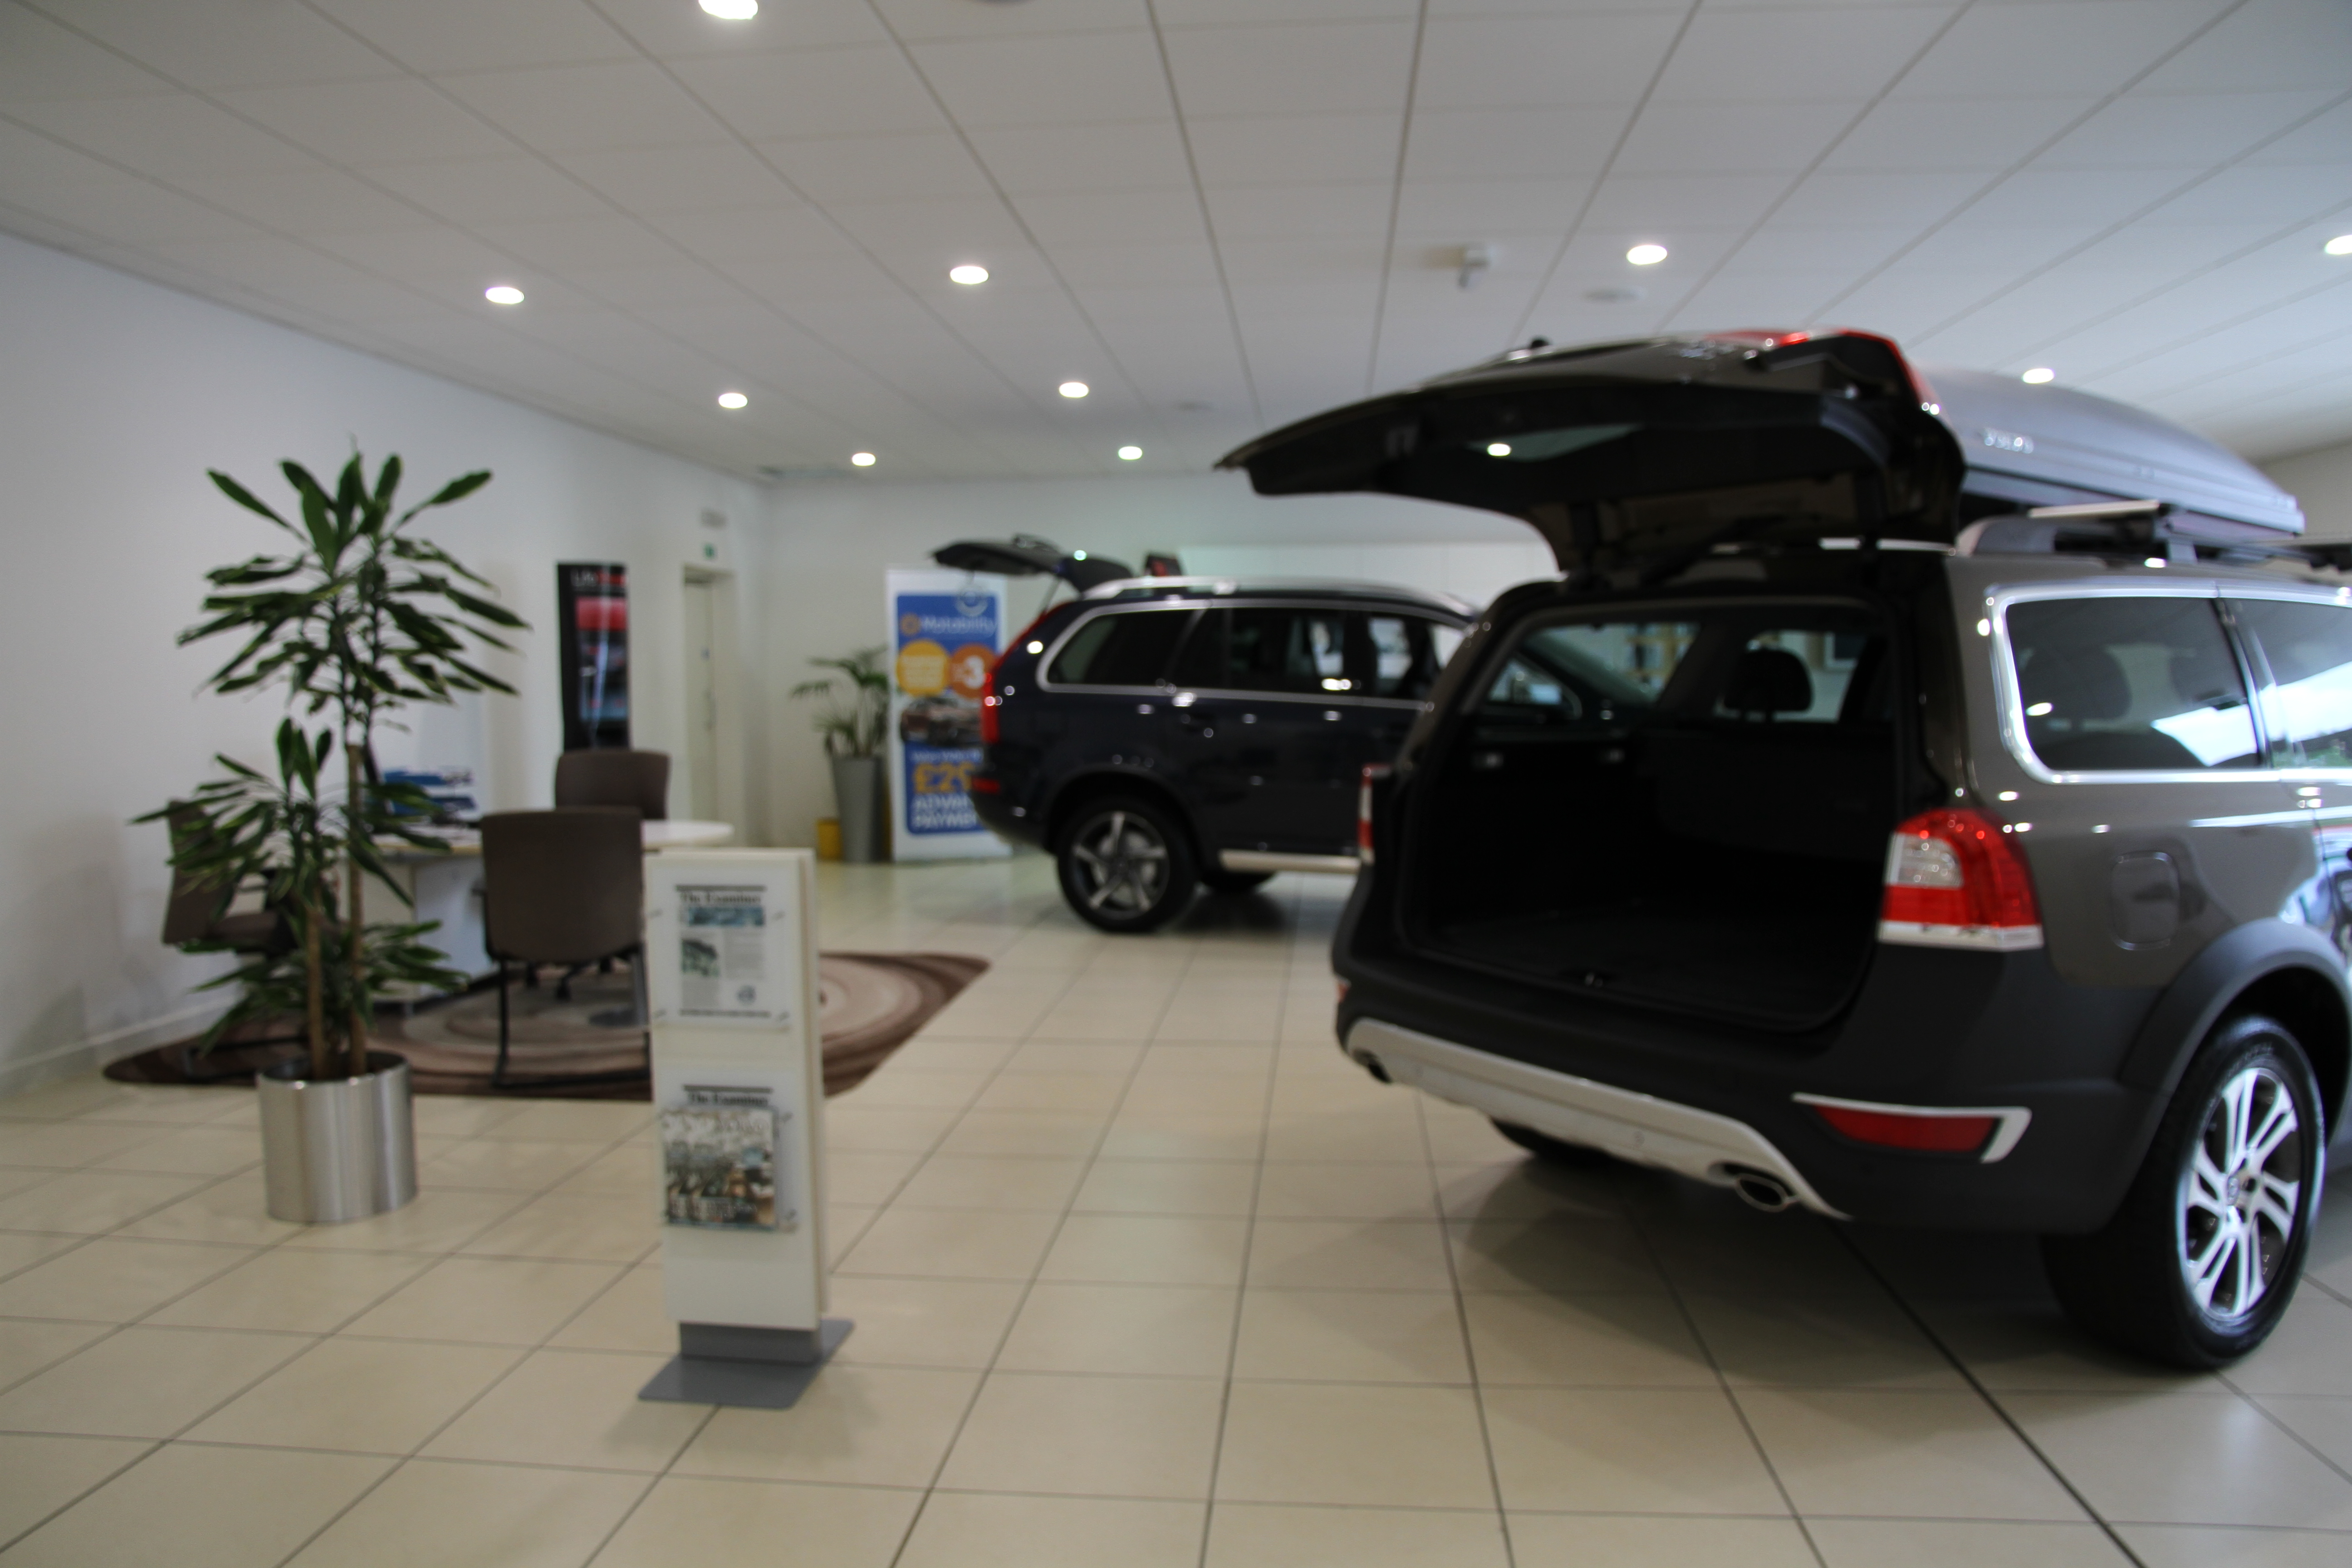 Images Stoneacre Chesterfield - Volvo Cars